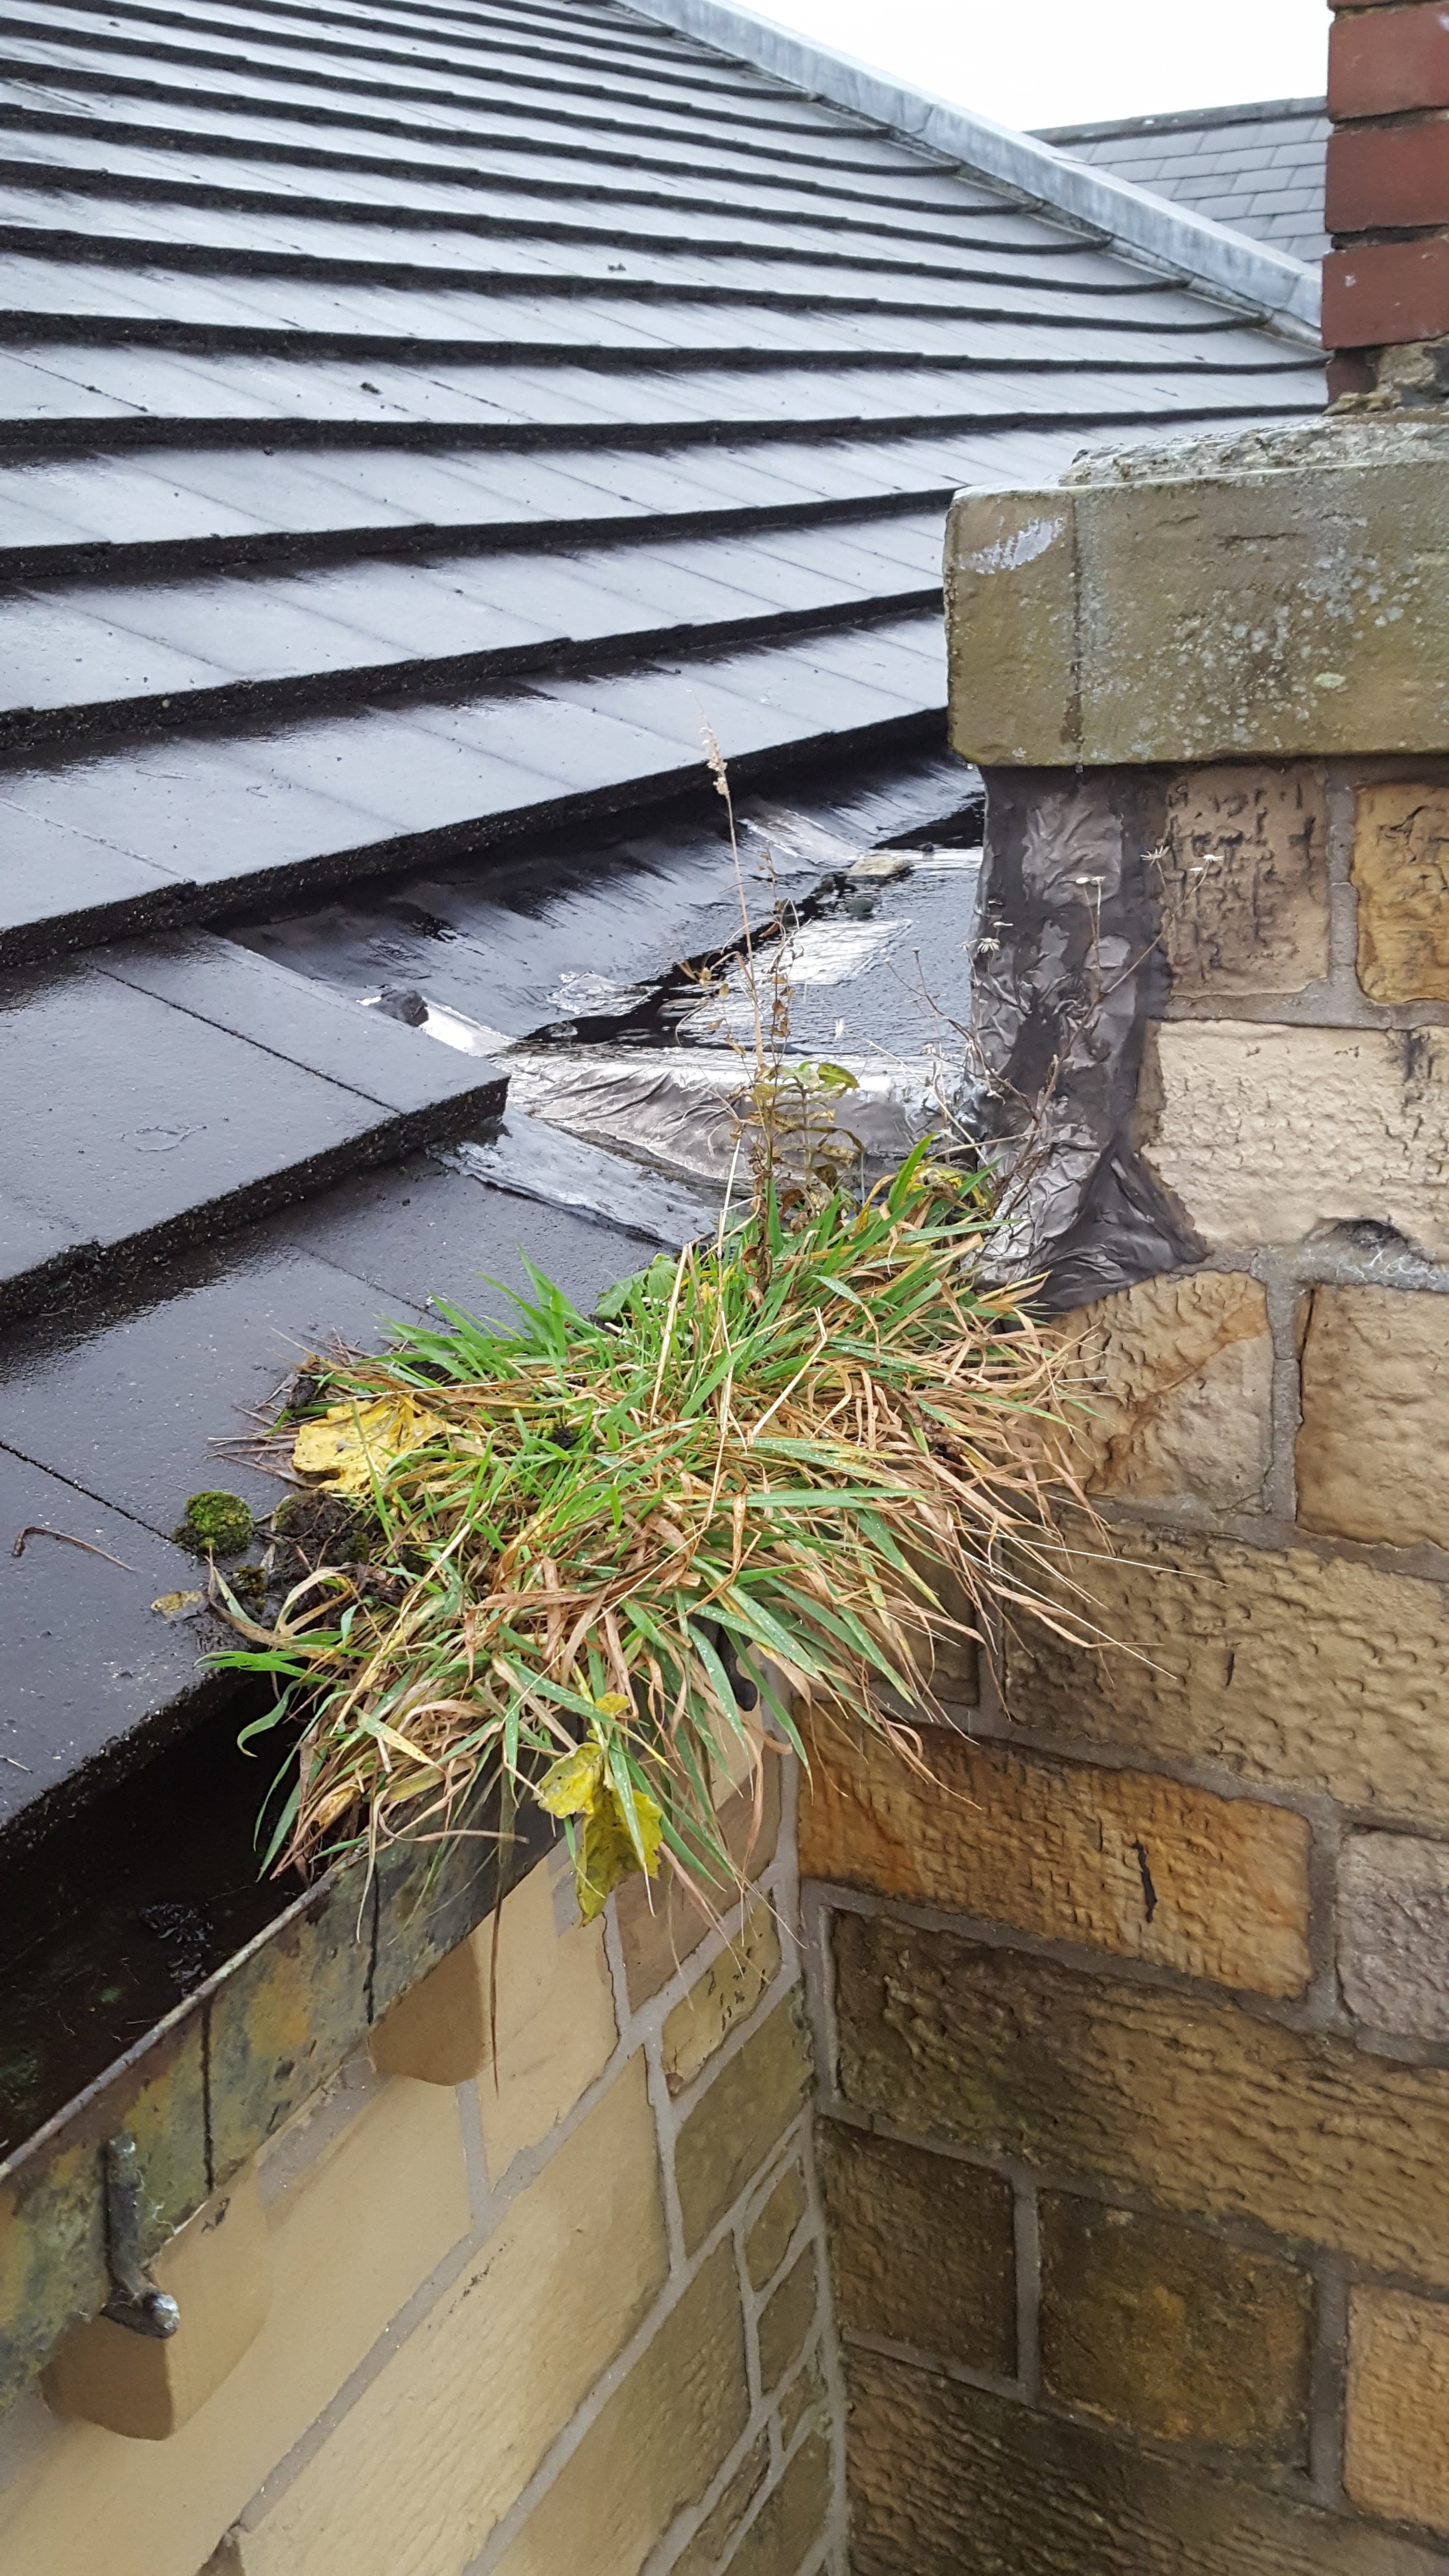 Overgrowth in the Roof Gutters